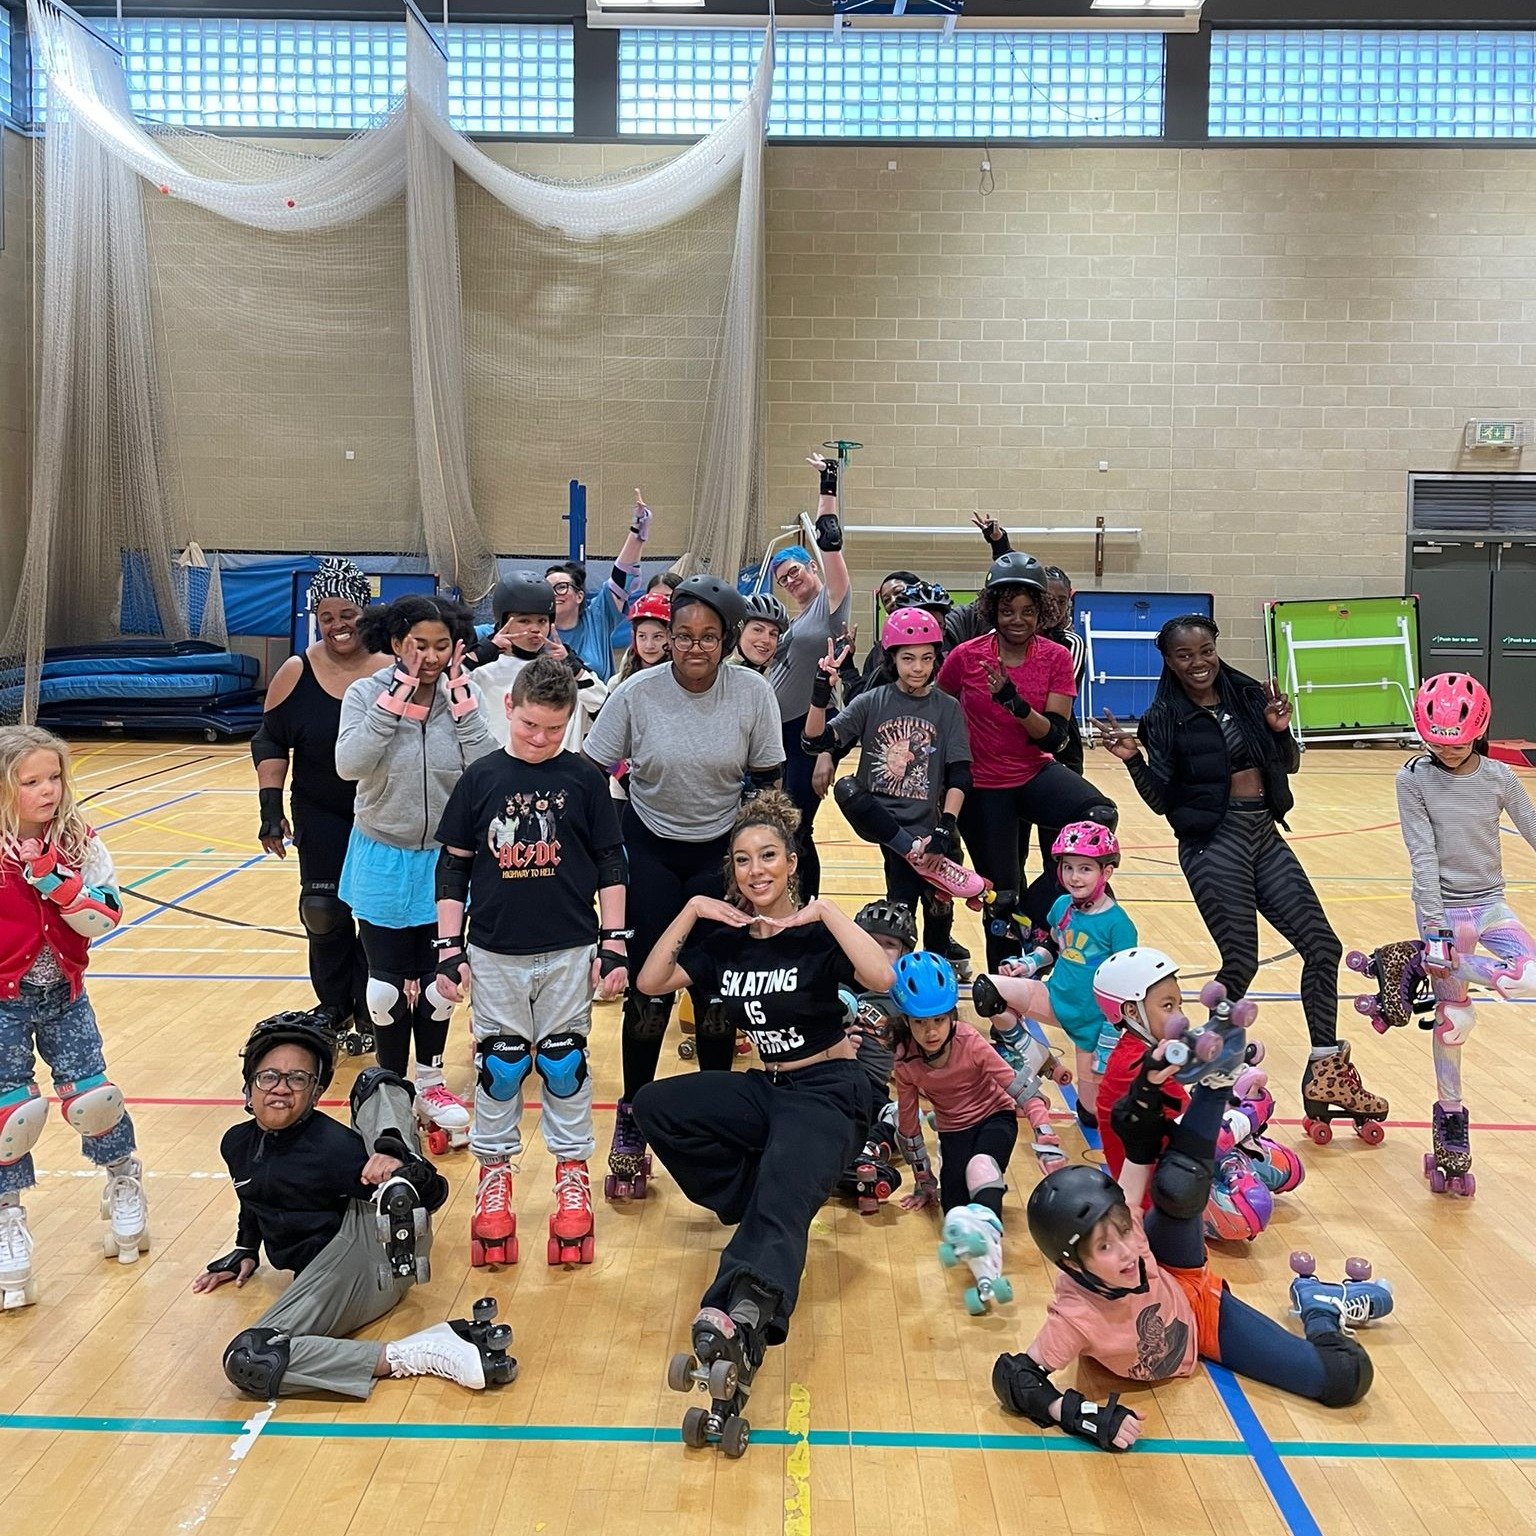 We love bringing kids and grown ups together on wheels at weekends - there&rsquo;s no better way to spend a day together 🥰 

🎉Join our 6 week course, starting THIS SATURDAY in Hackney, to learn on wheels together 🎉

Book online at ▶️isleofskating.